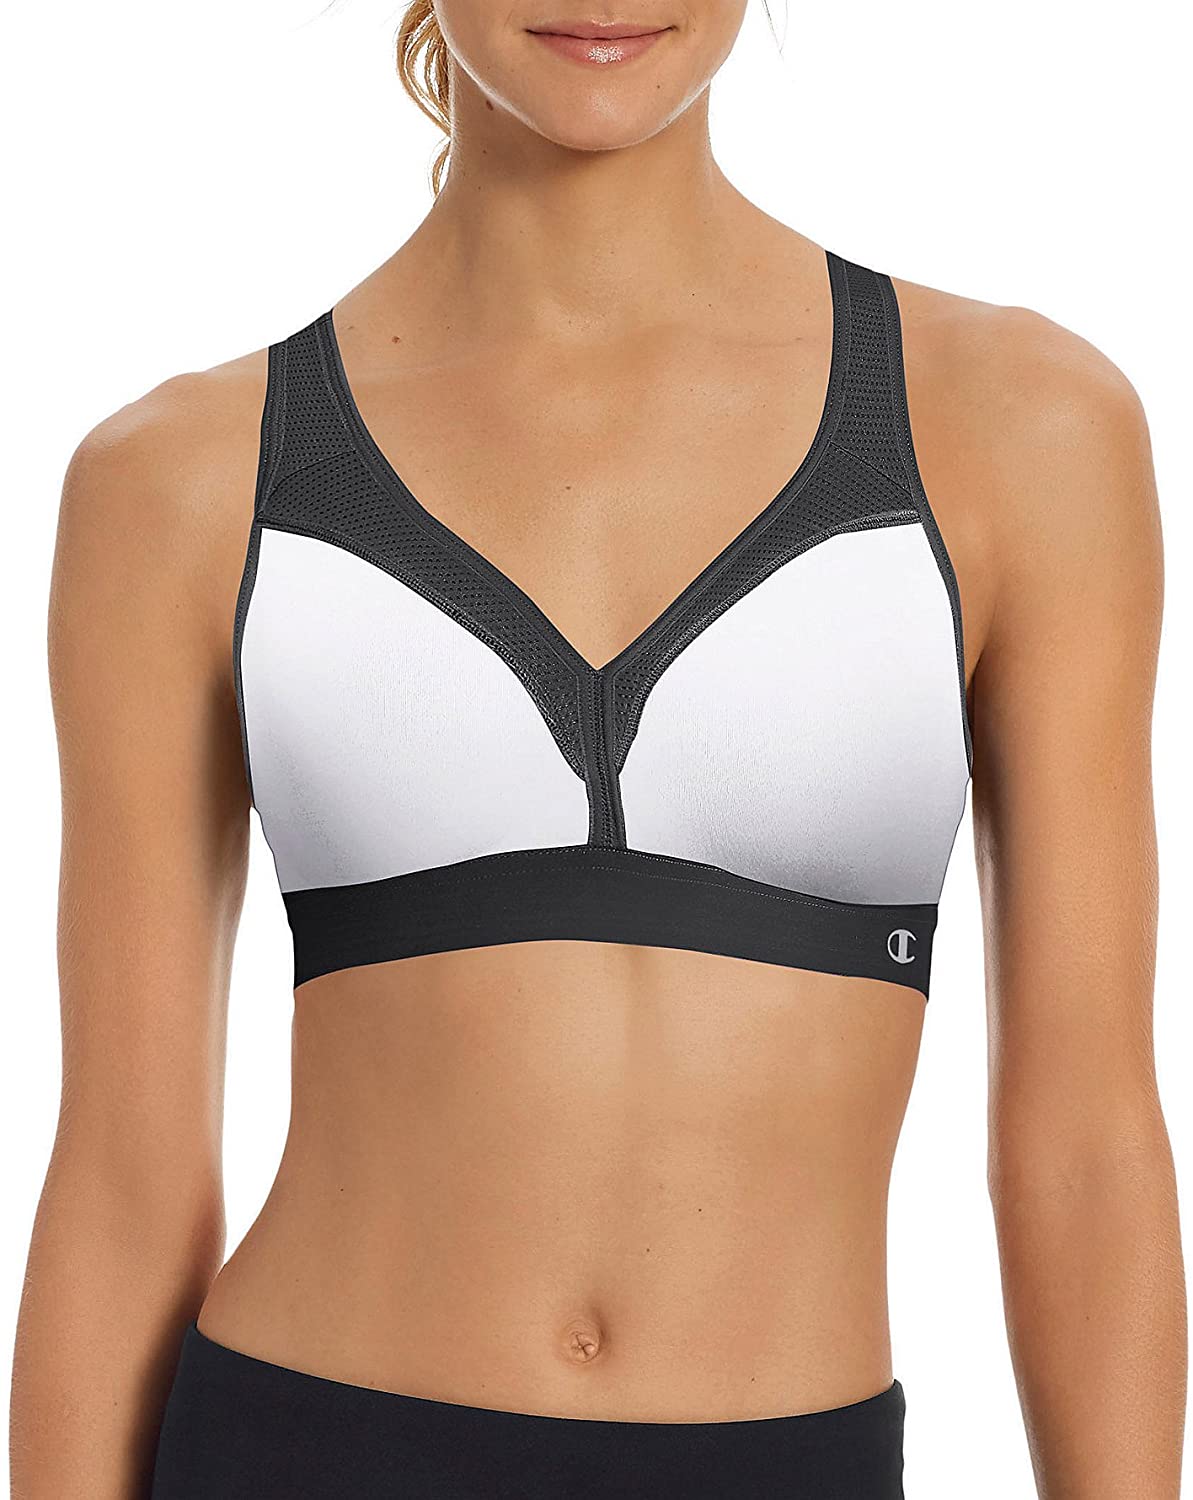 The Show-Off Sports Bra